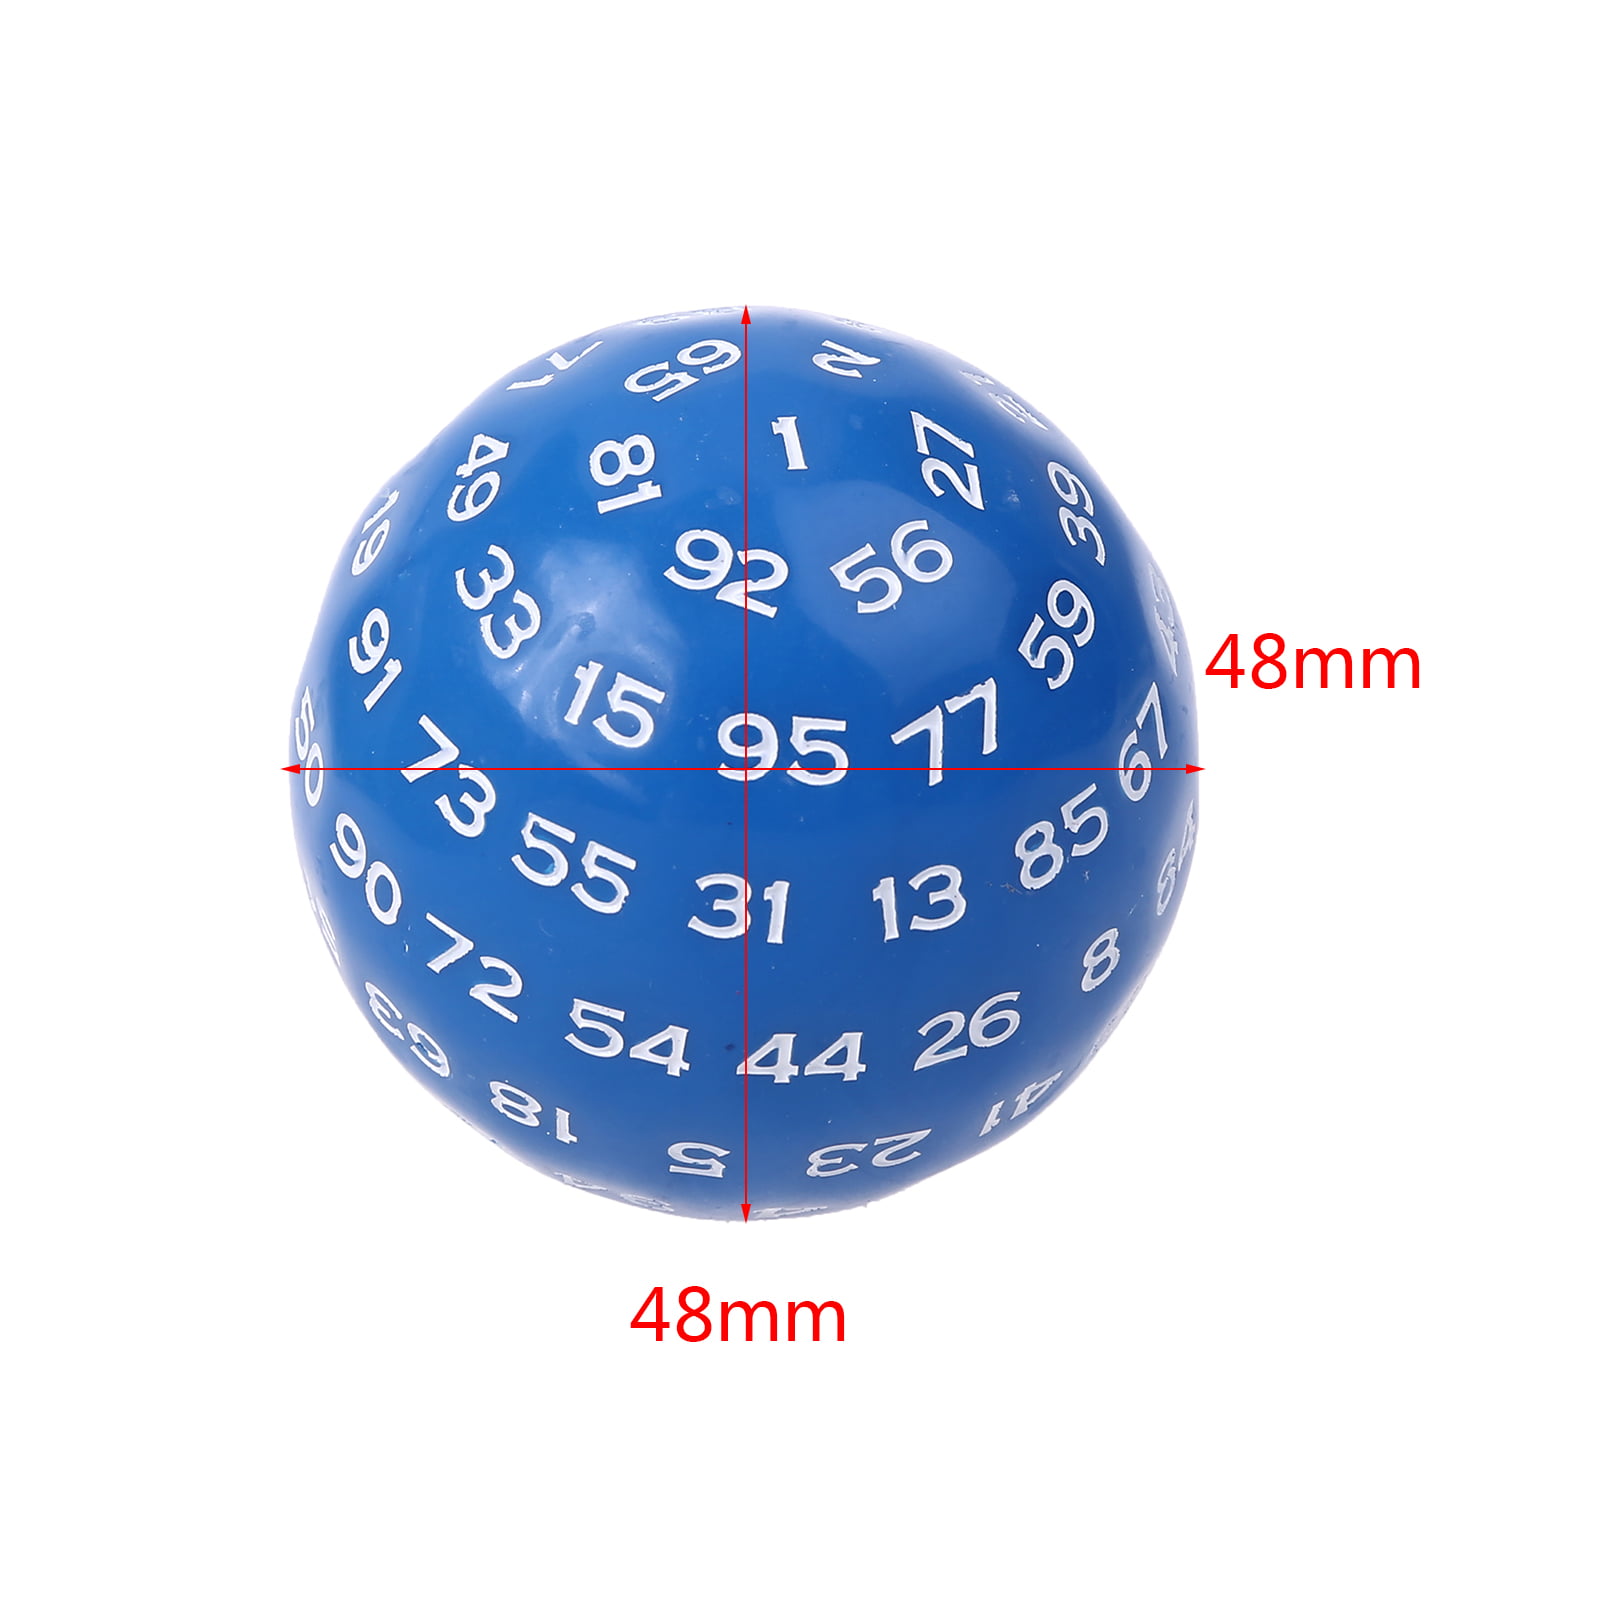 Details about   100 Sides Polyhedral Dice D100 Multi Sided Acrylic Dices for Table Board Game 